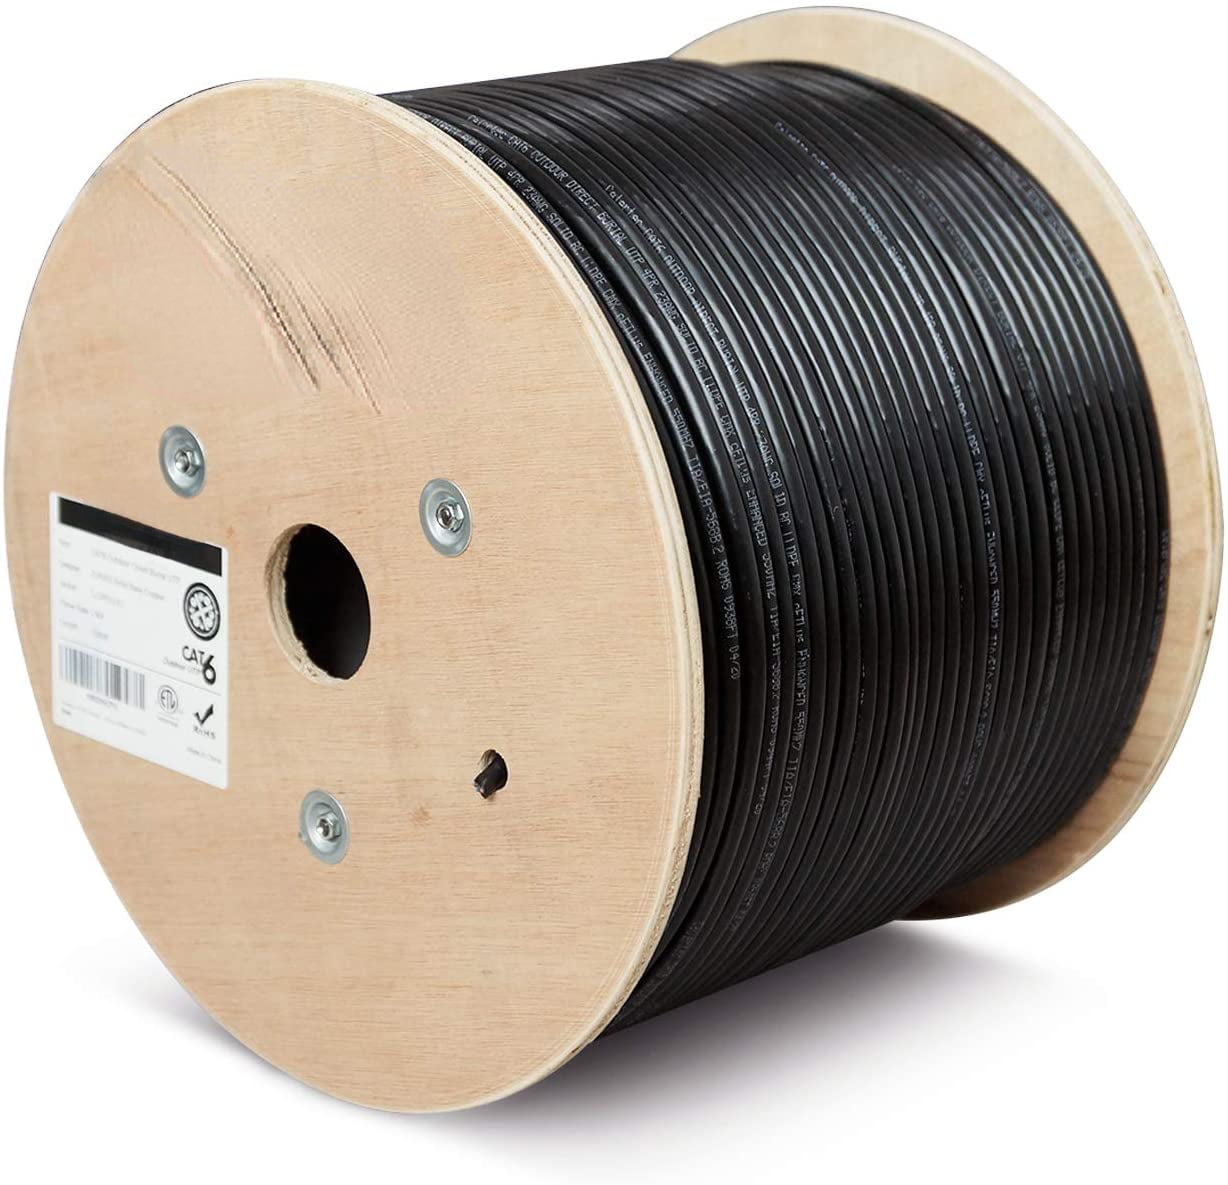 CAT6 Outdoor Cable 1000ft 23AWG Solid Bare Copper Unshielded Twisted Pair  (UTP) UV Resistant Weatherproof Waterproof CMX ETL Listed 550MHz Bulk  Ethernet Cable Wooden Spool- Bla